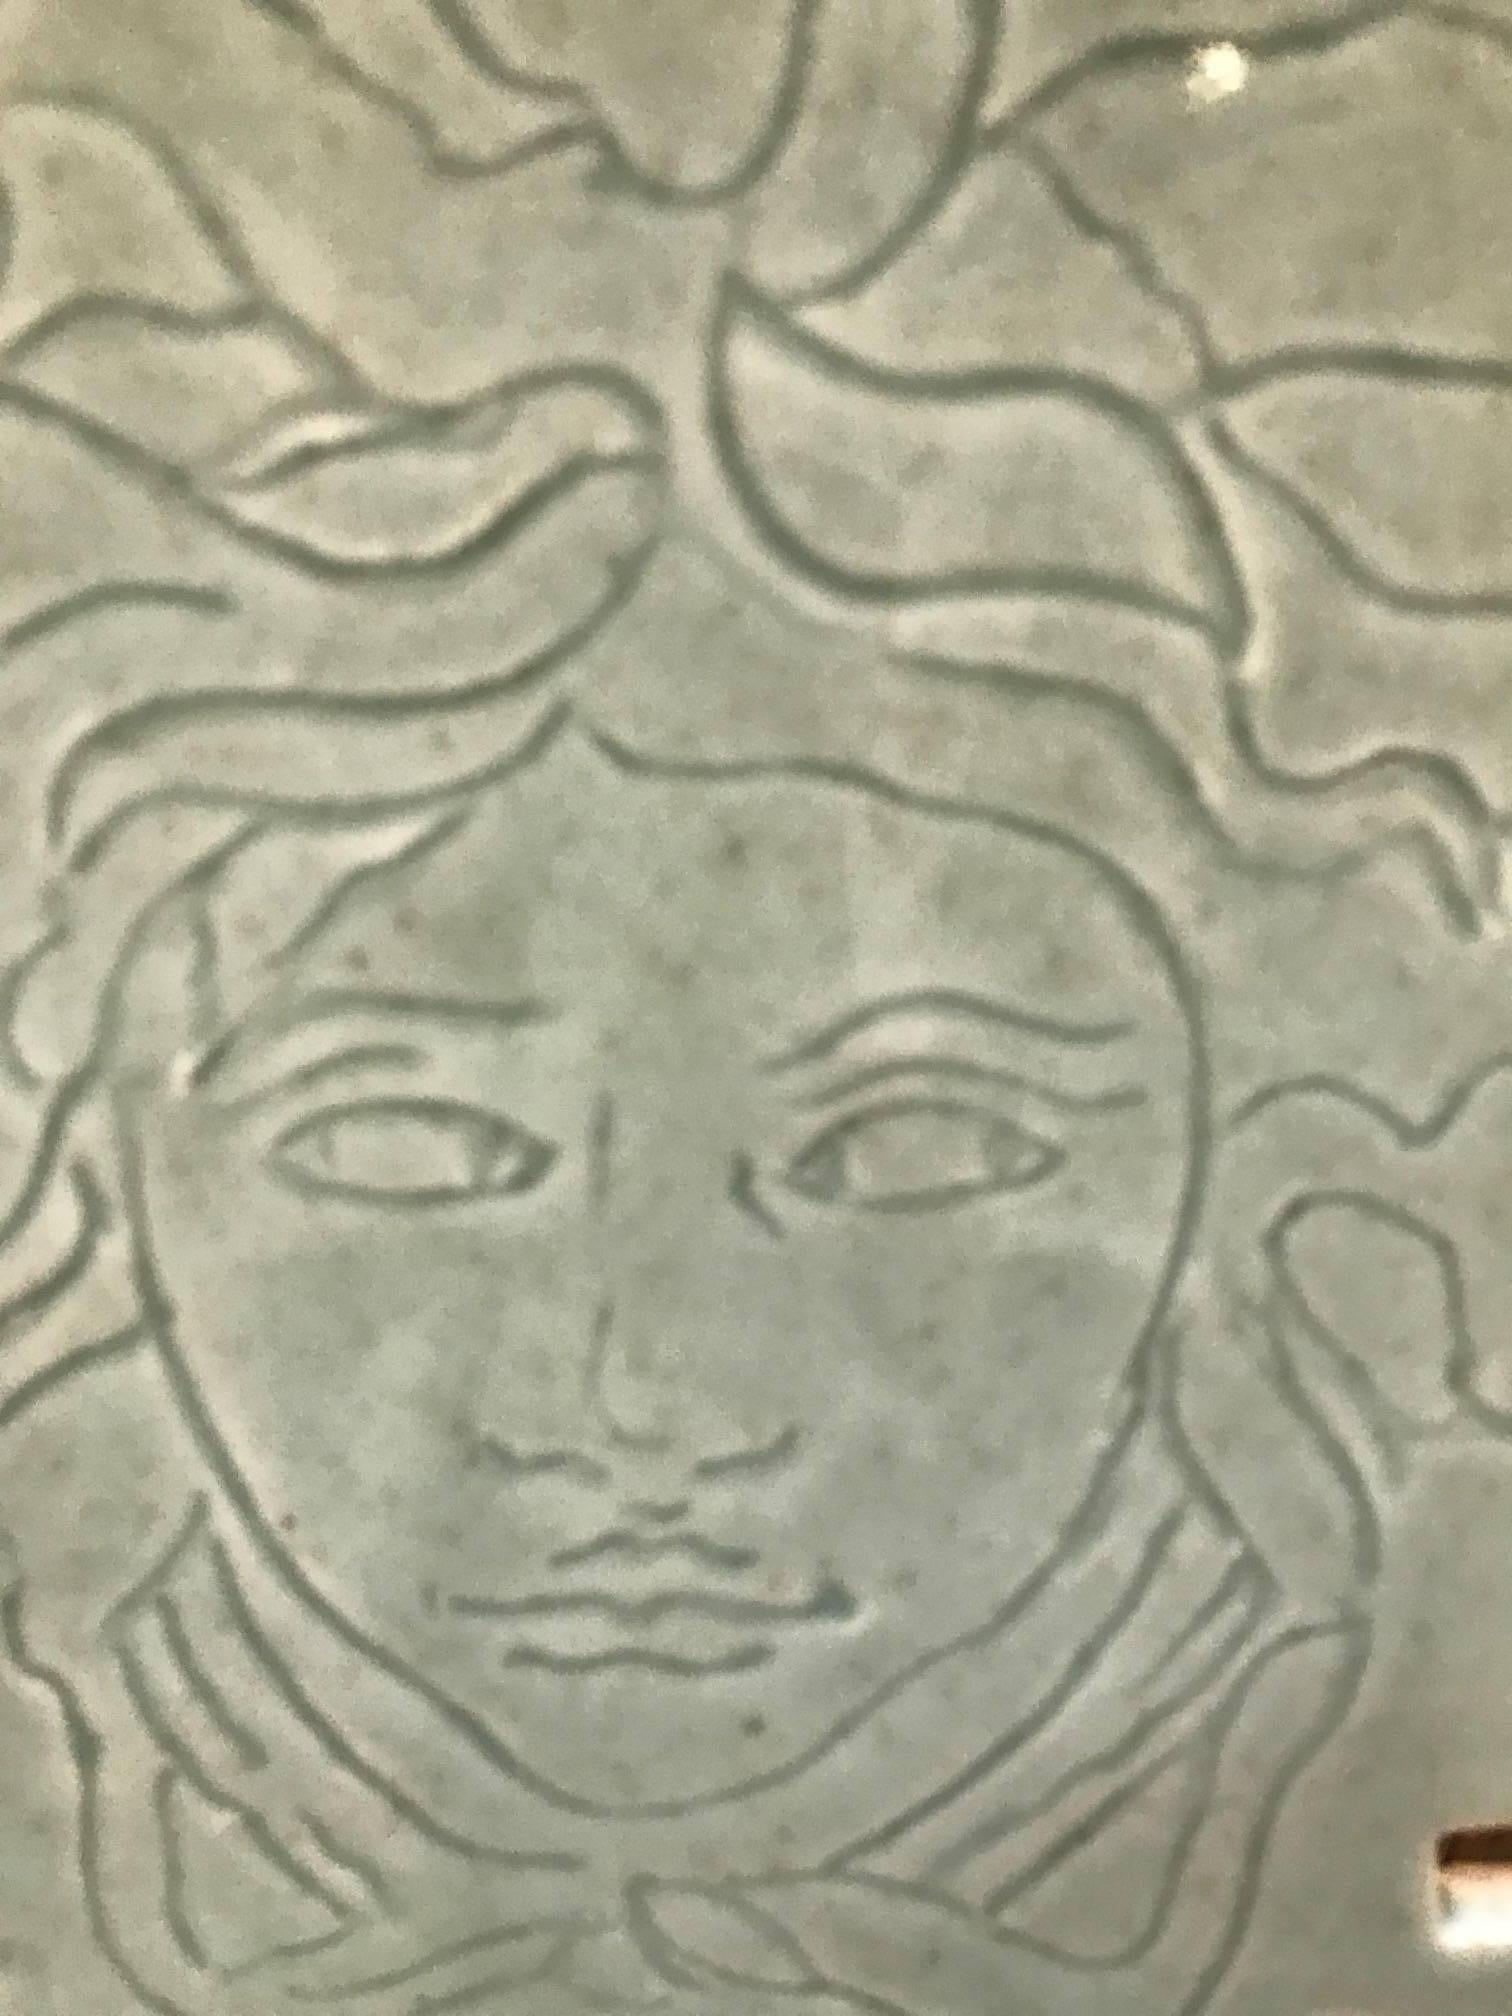 Artist signed porcelain tile depicting Medusa by Ricardo Arango. Inspired by ancient artifacts combining expressionist sculpture and antiquity. Signed on porcelain tile and underside of steel base. The base is 6.75 inches square.

Ricardo Arango